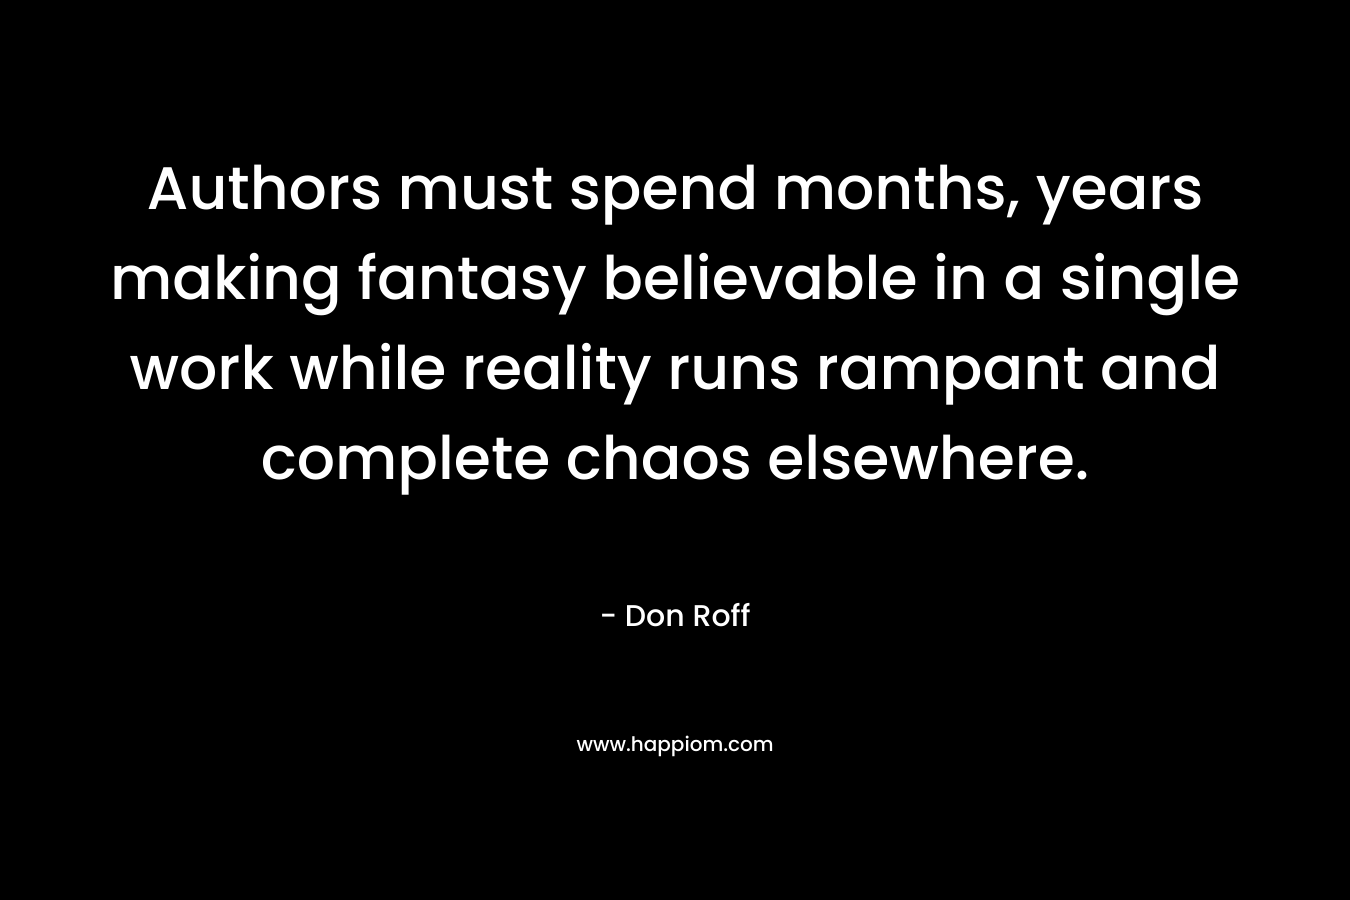 Authors must spend months, years making fantasy believable in a single work while reality runs rampant and complete chaos elsewhere.